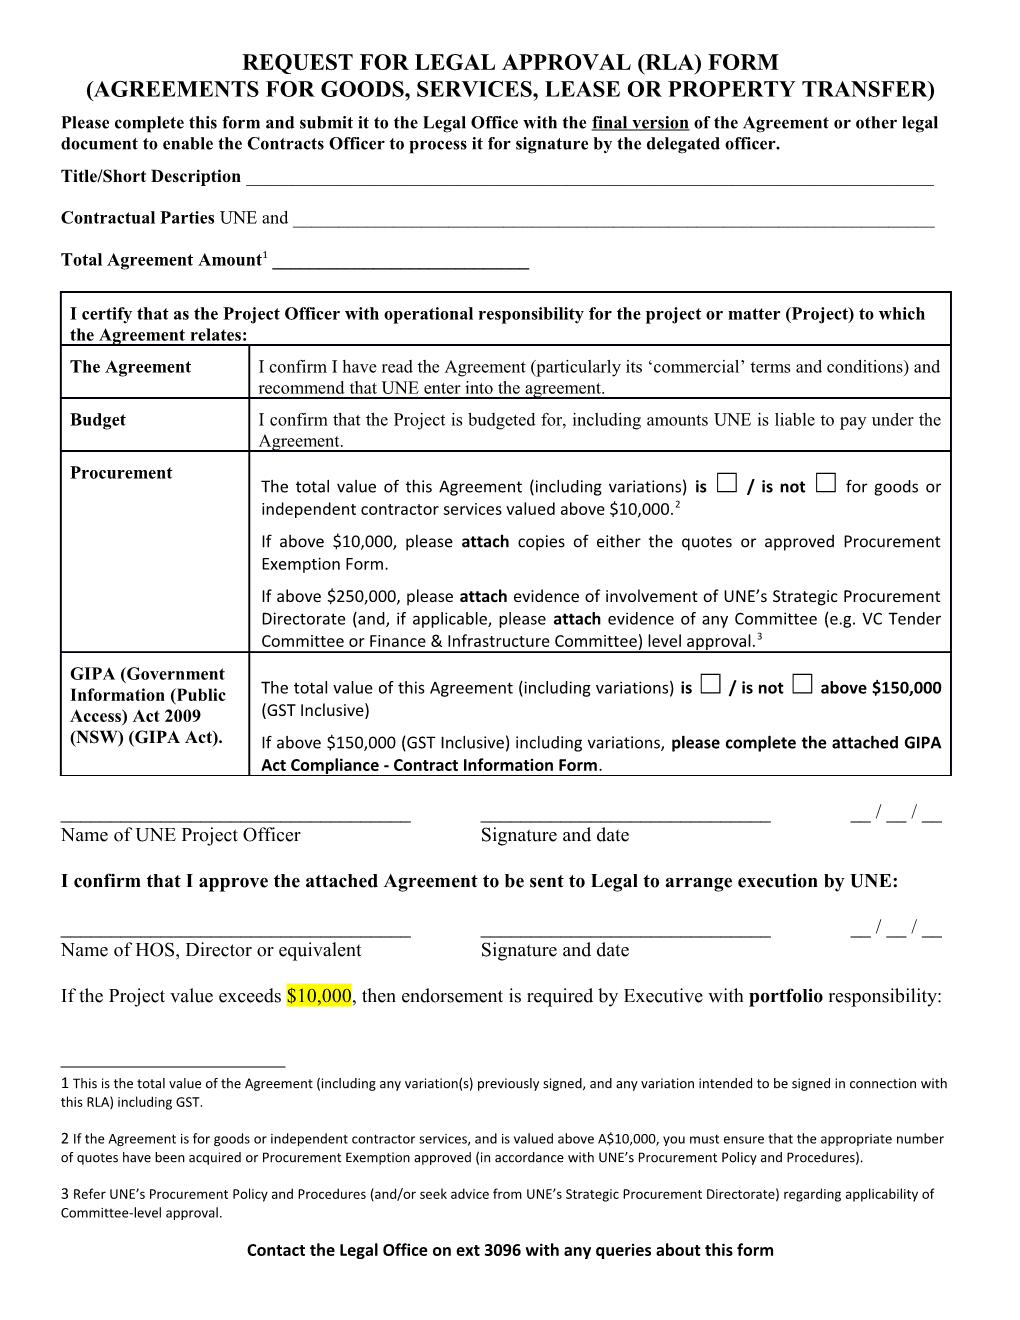 Request for Legal Approval (Rla) Form